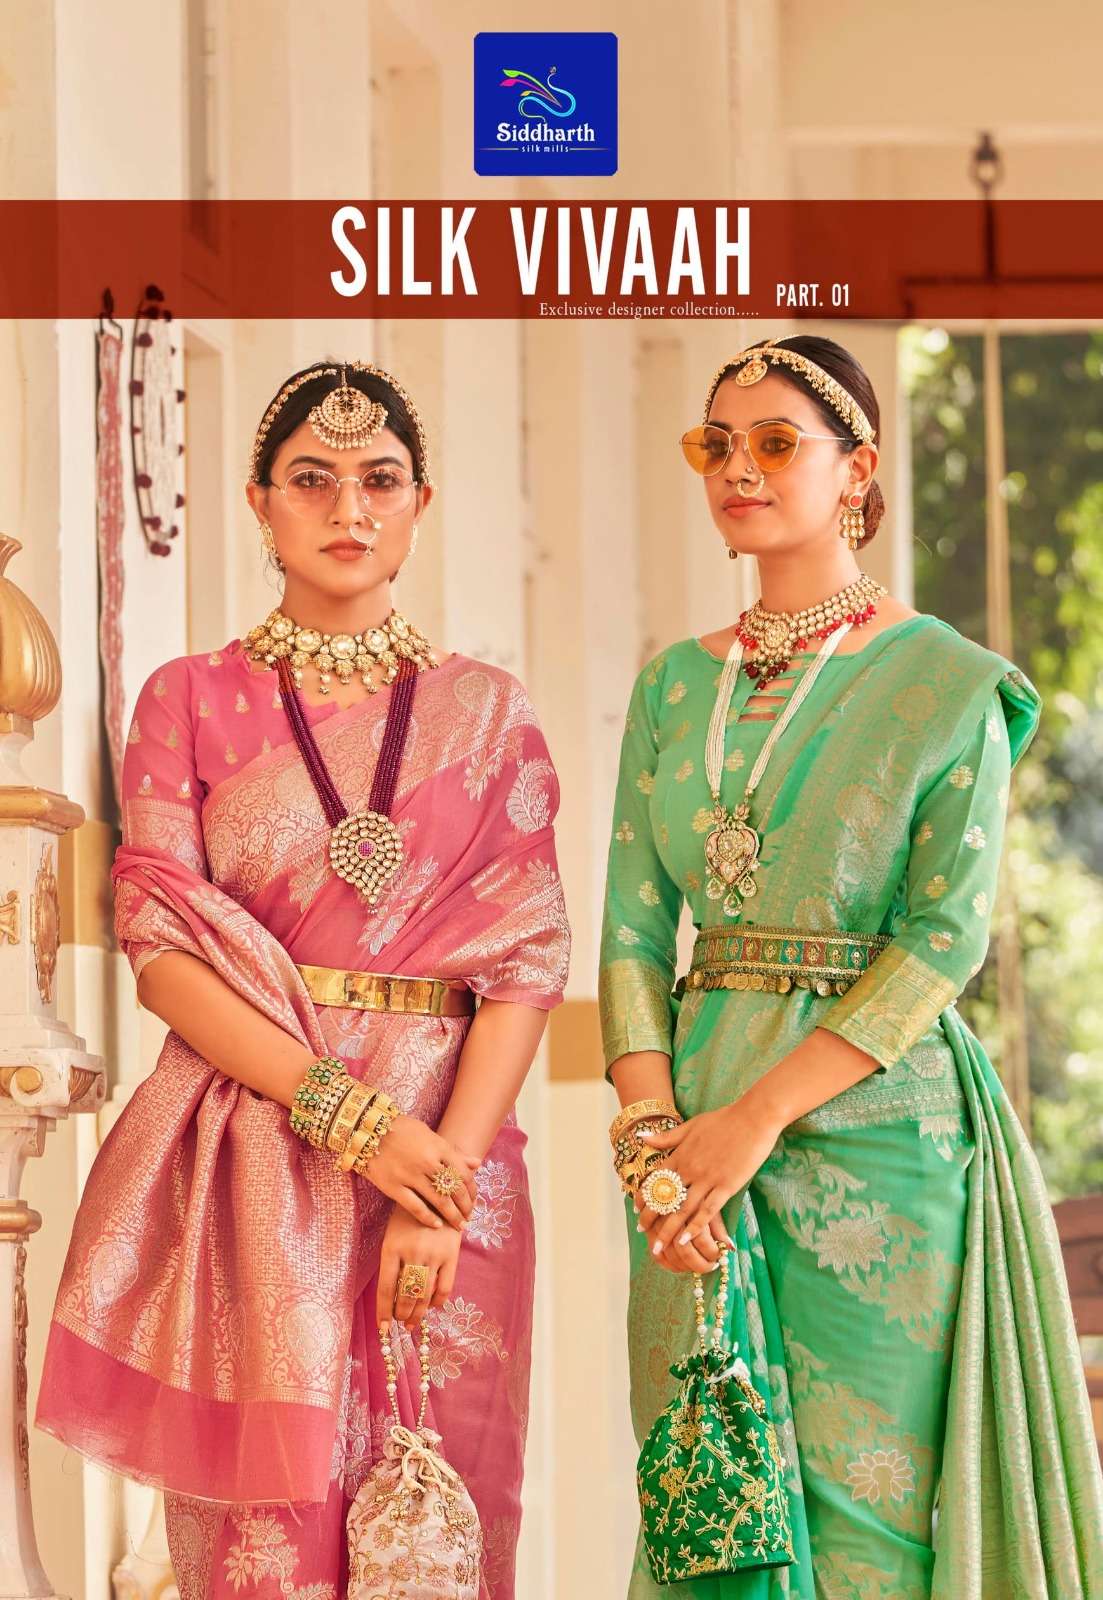 siddharth silk vivah fancy south indian sarees wholesale store in surat 